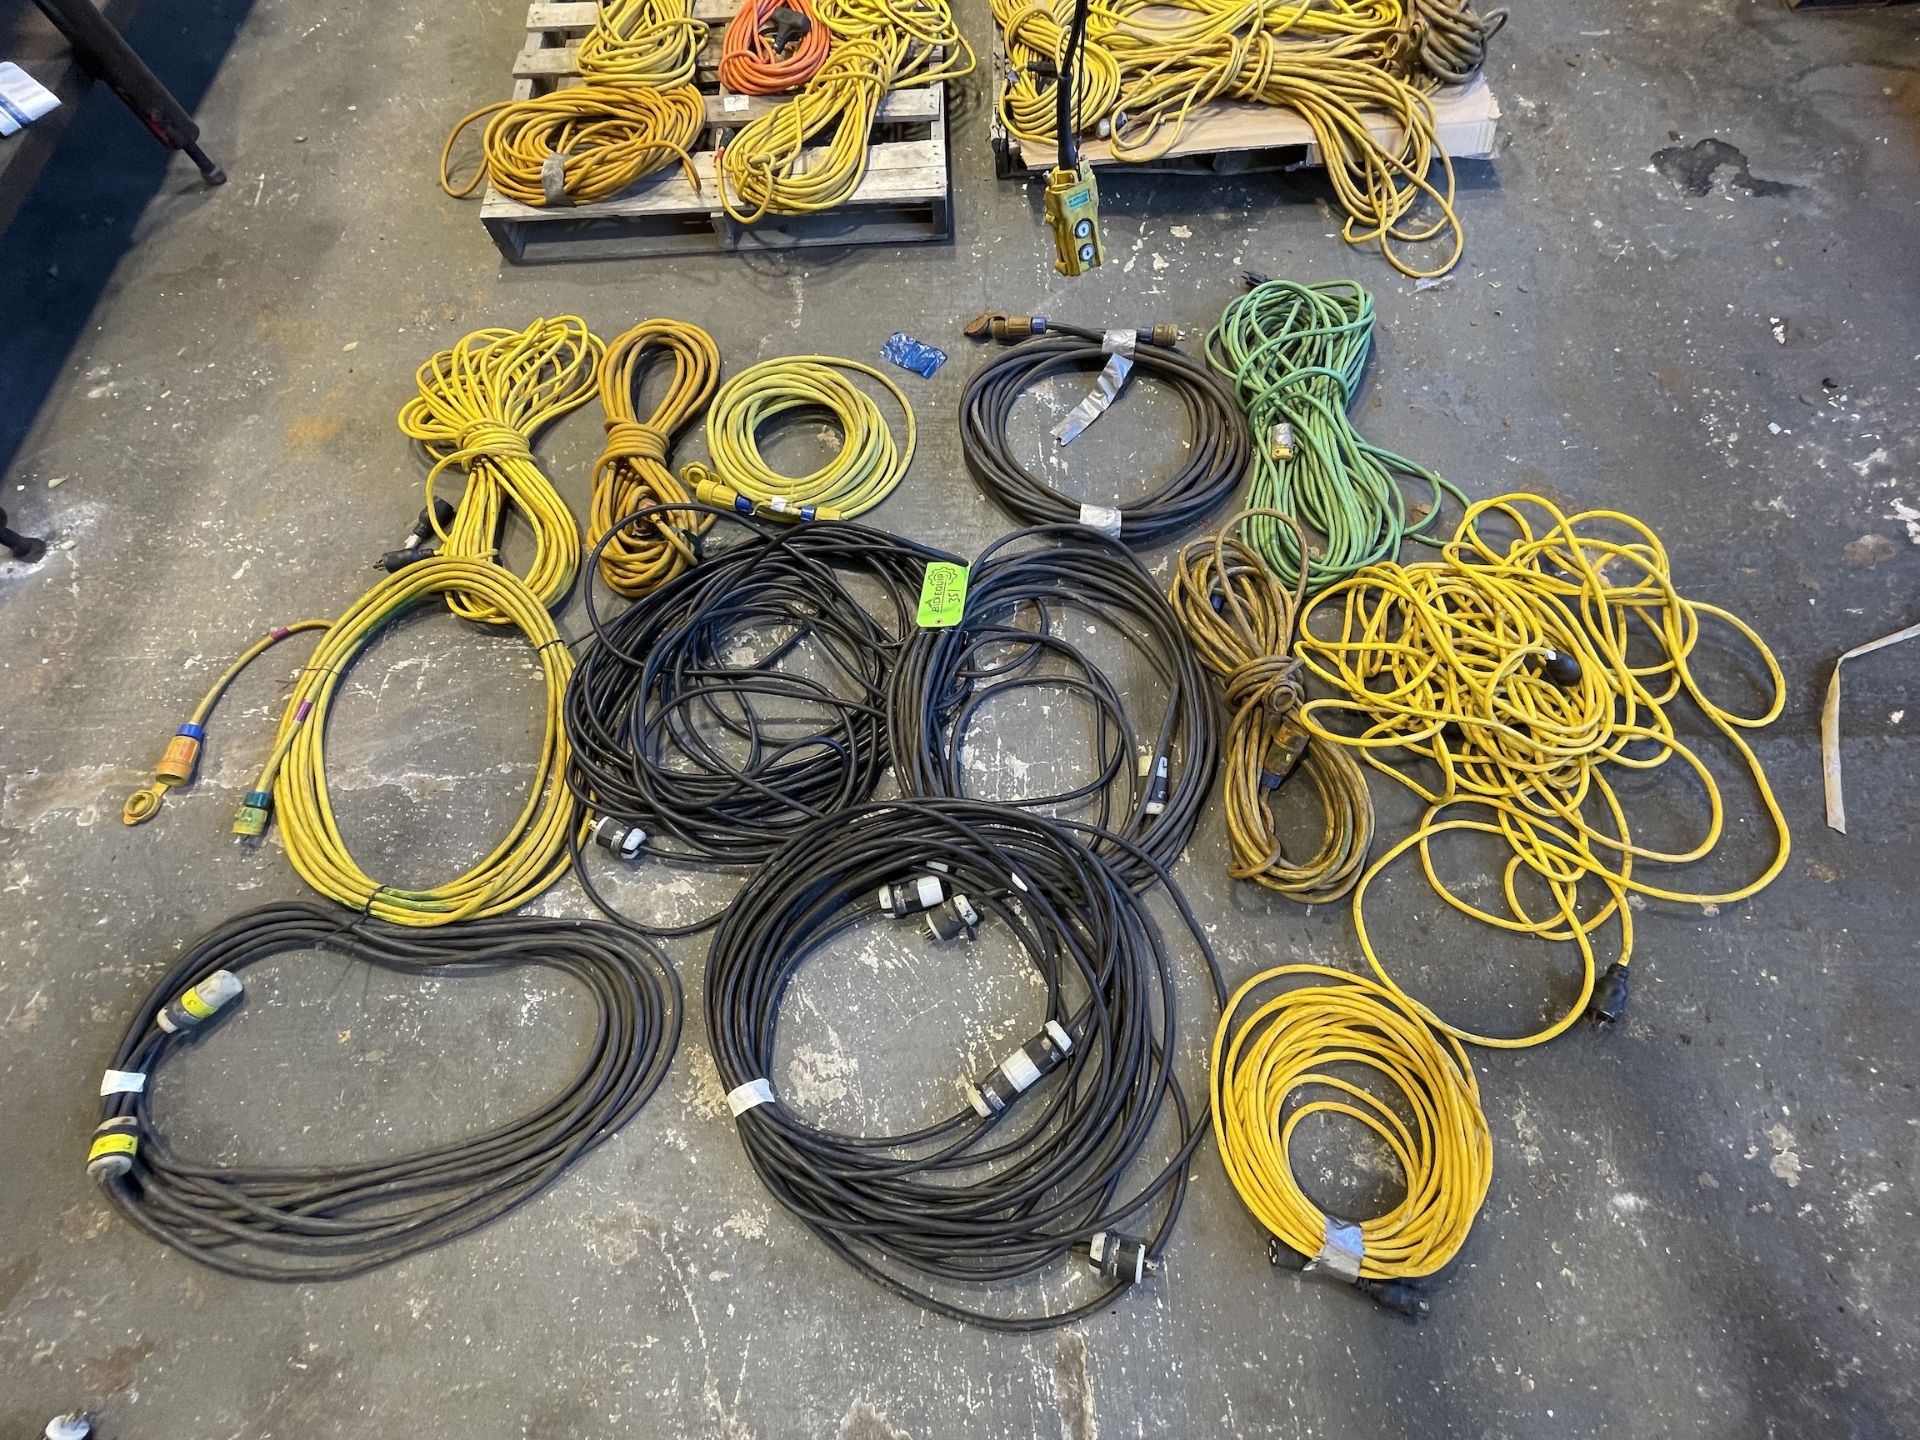 Lot of Extension Cords - Upland